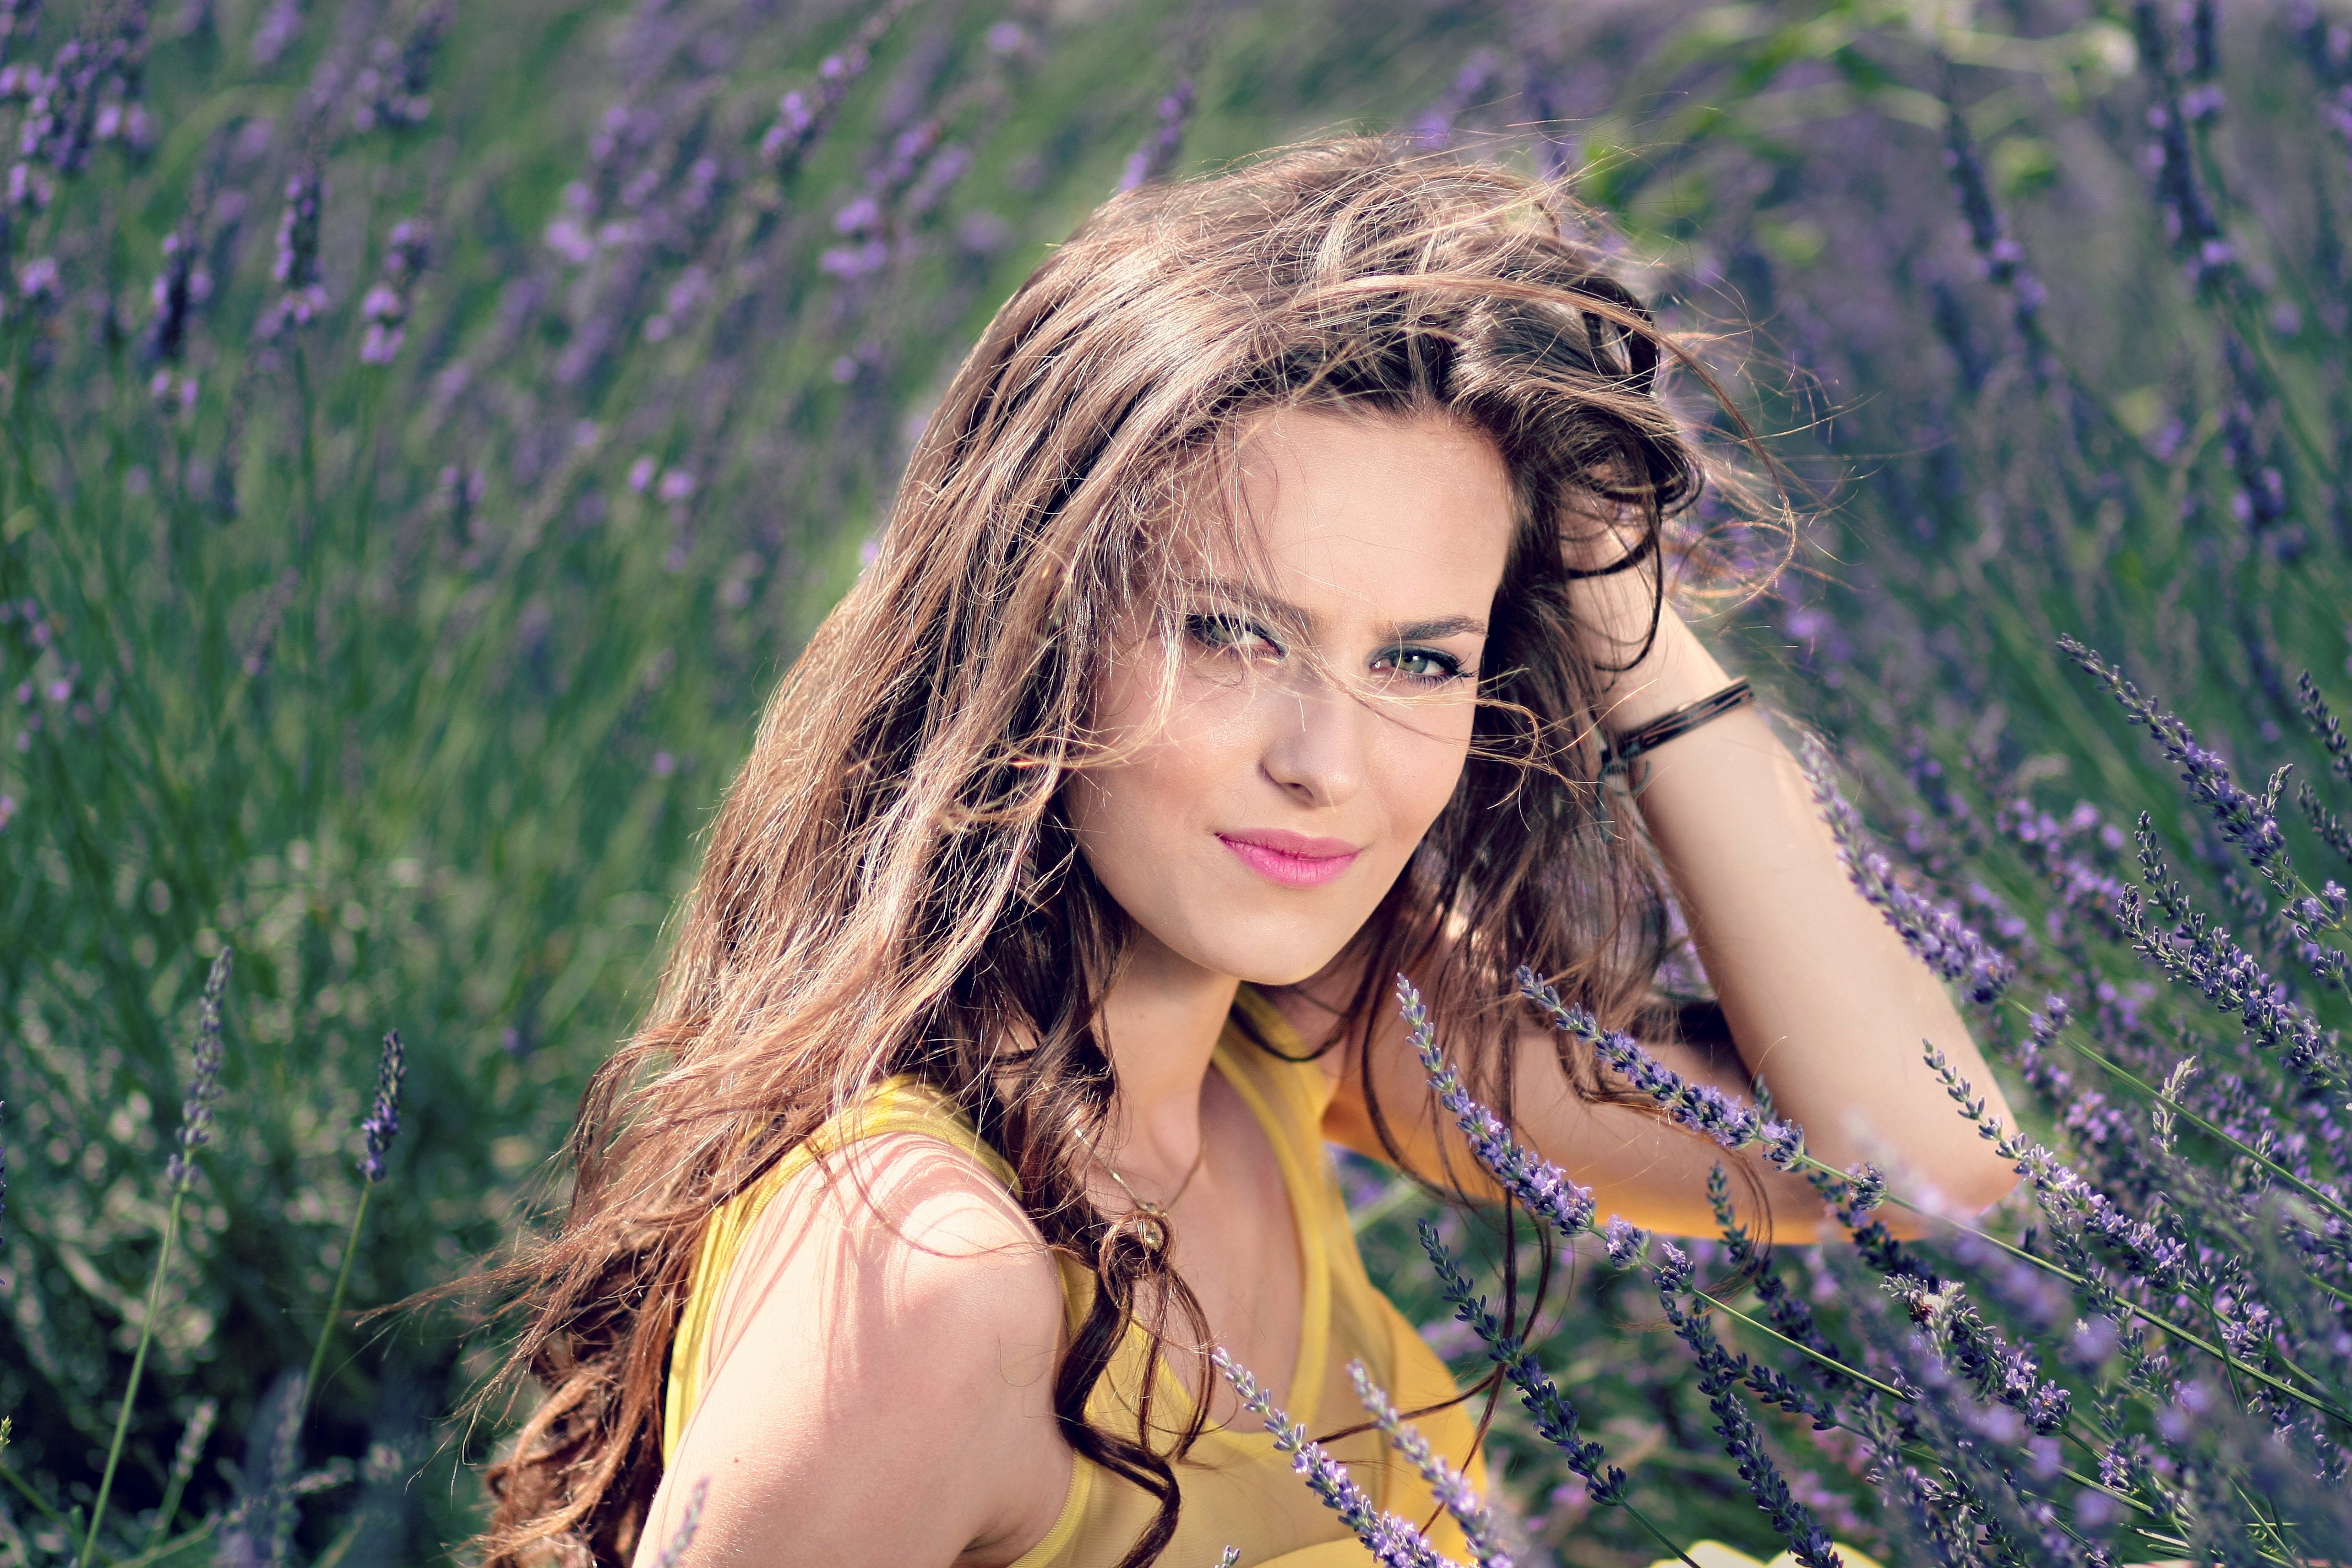 Women's yellow tank top holding her brown curly hair while sitting on a purple flower photo